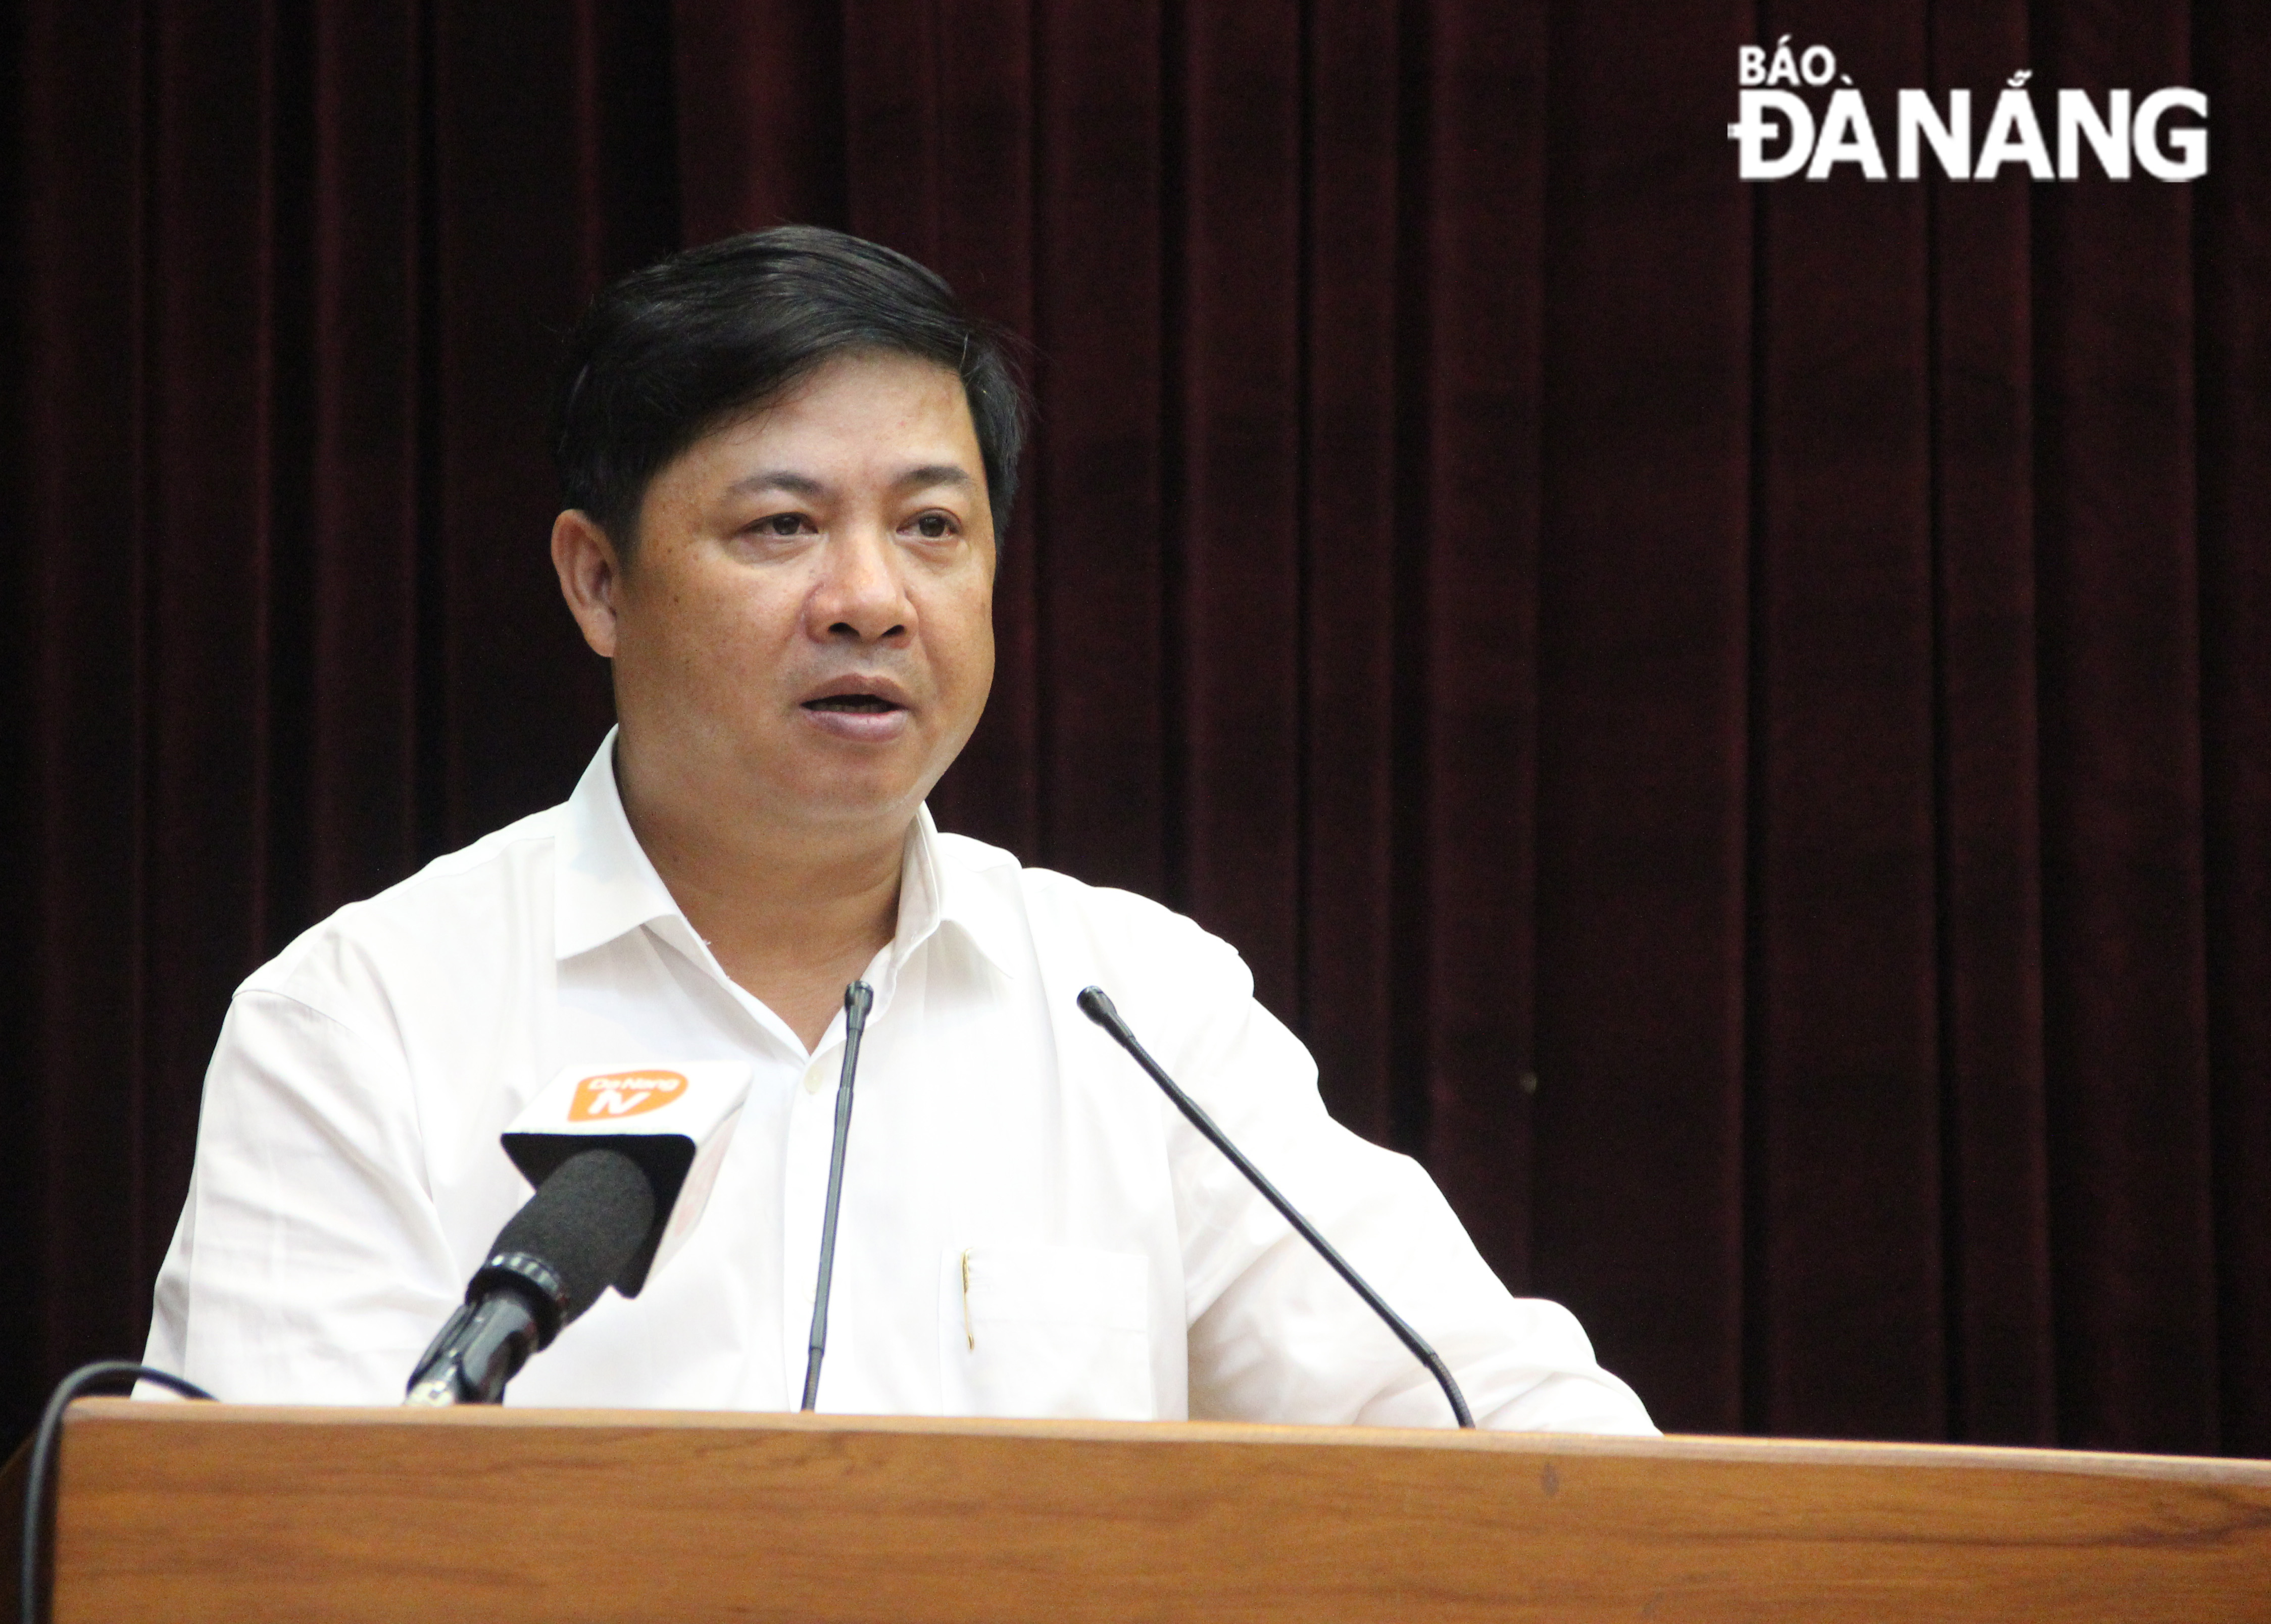 Deputy Secretary of the Da Nang Party Committee Luong Nguyen Minh Triet speaking at the event. Photo: X.H